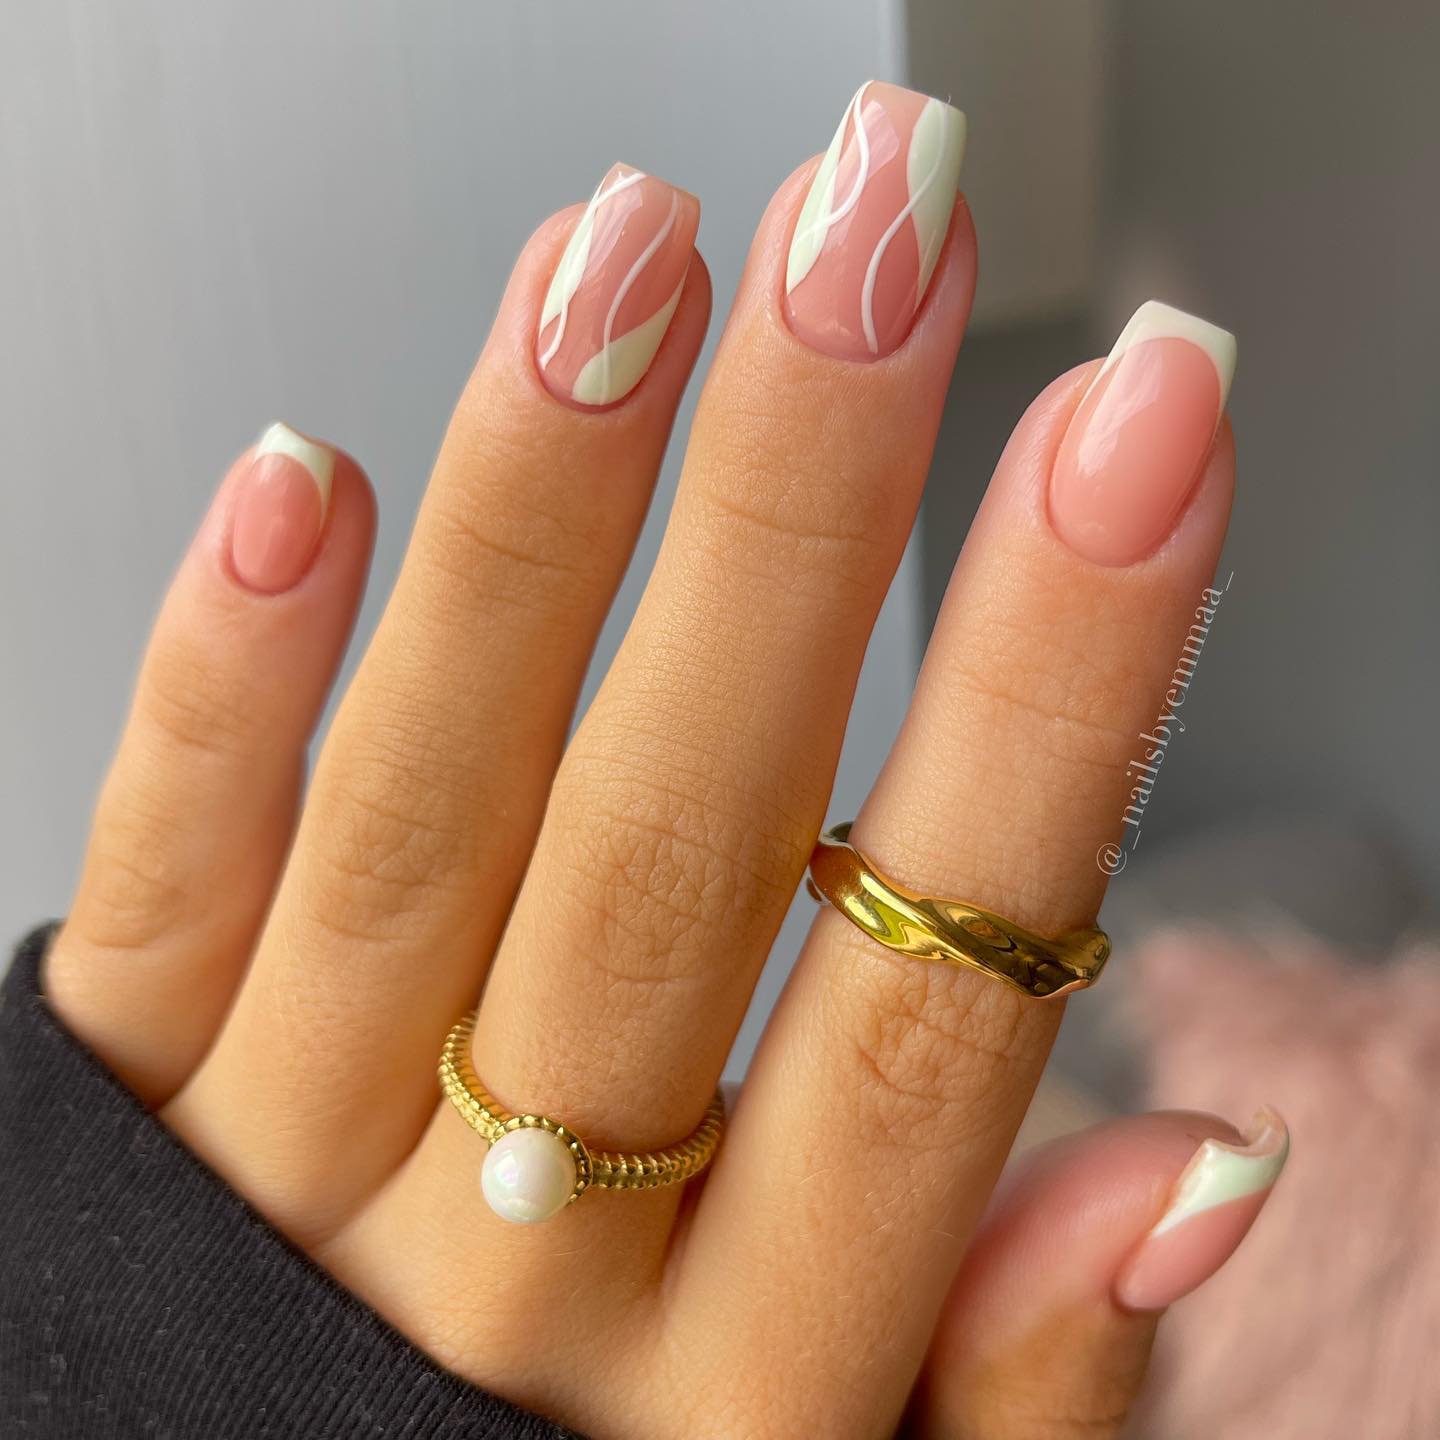 50 Best Nail Designs Trends To Try Out In 2022 images 47